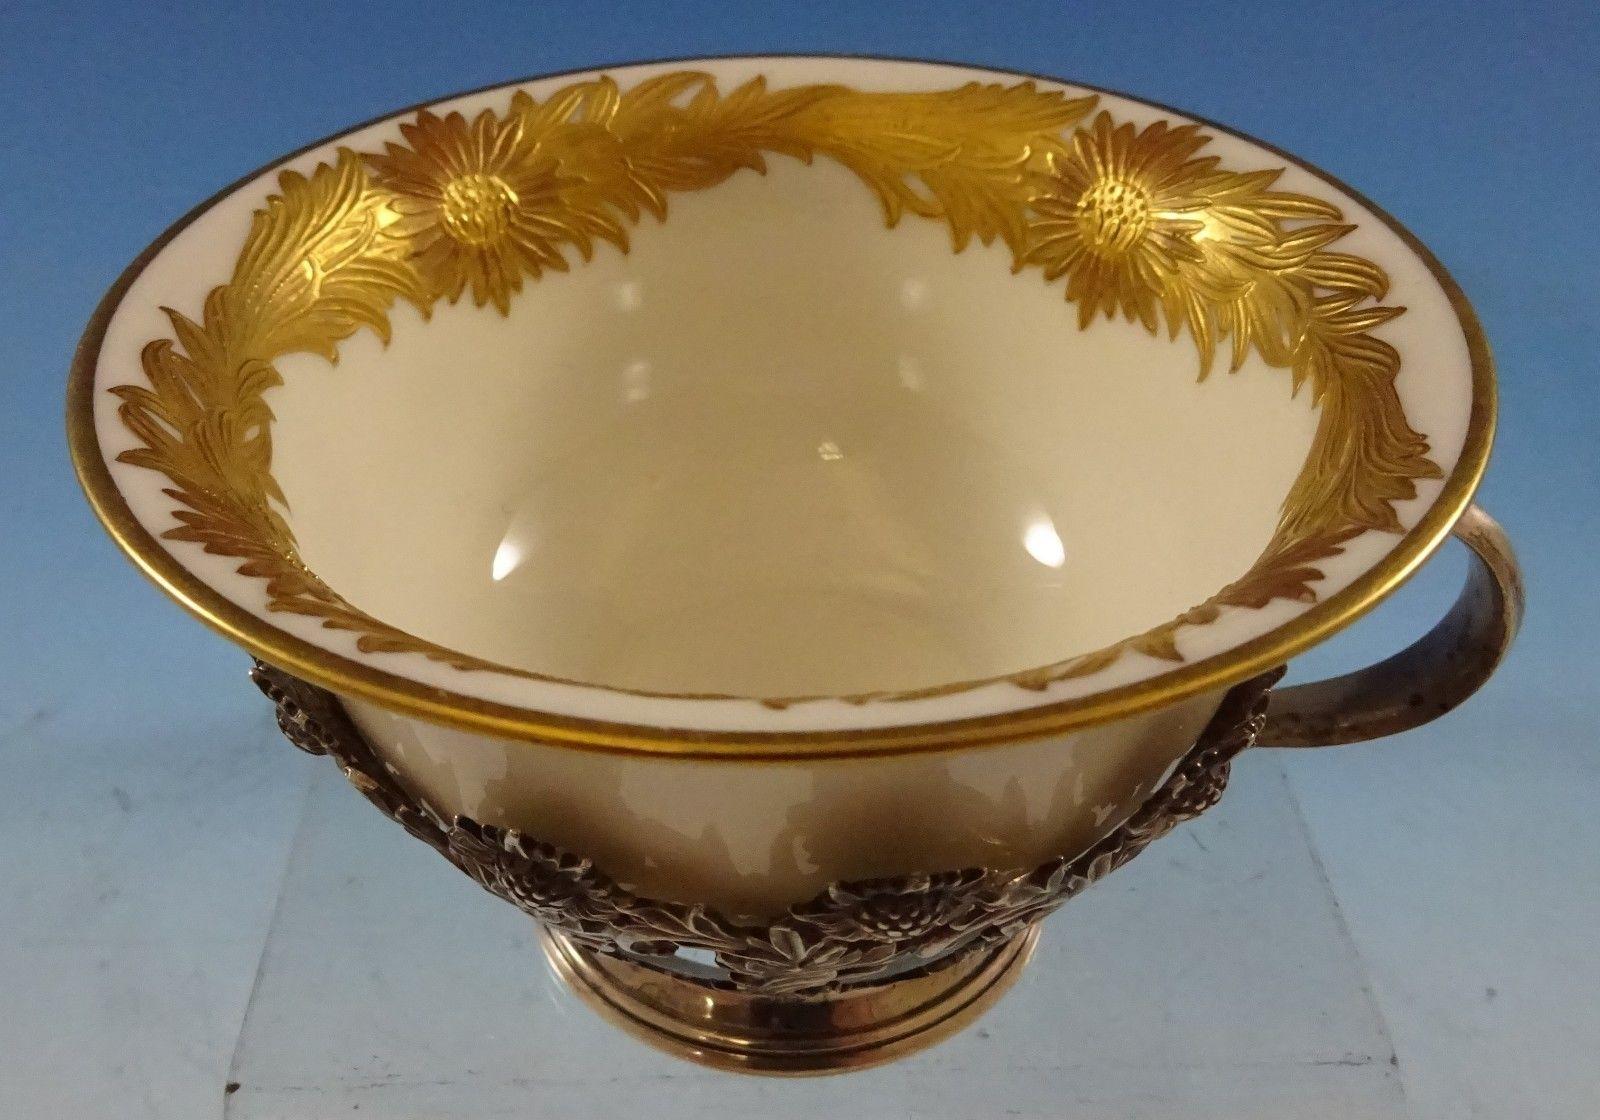 Chrysanthemum by Tiffany & Co.
Stunning Chrysanthemum by Tiffany & Co. sterling silver tea cup with gorgeous gold chrysanthemum Lenox liner. The piece measures 4 1 7/8 and weighs 2.22 troy ounces. It is not monogrammed and is in excellent condition.